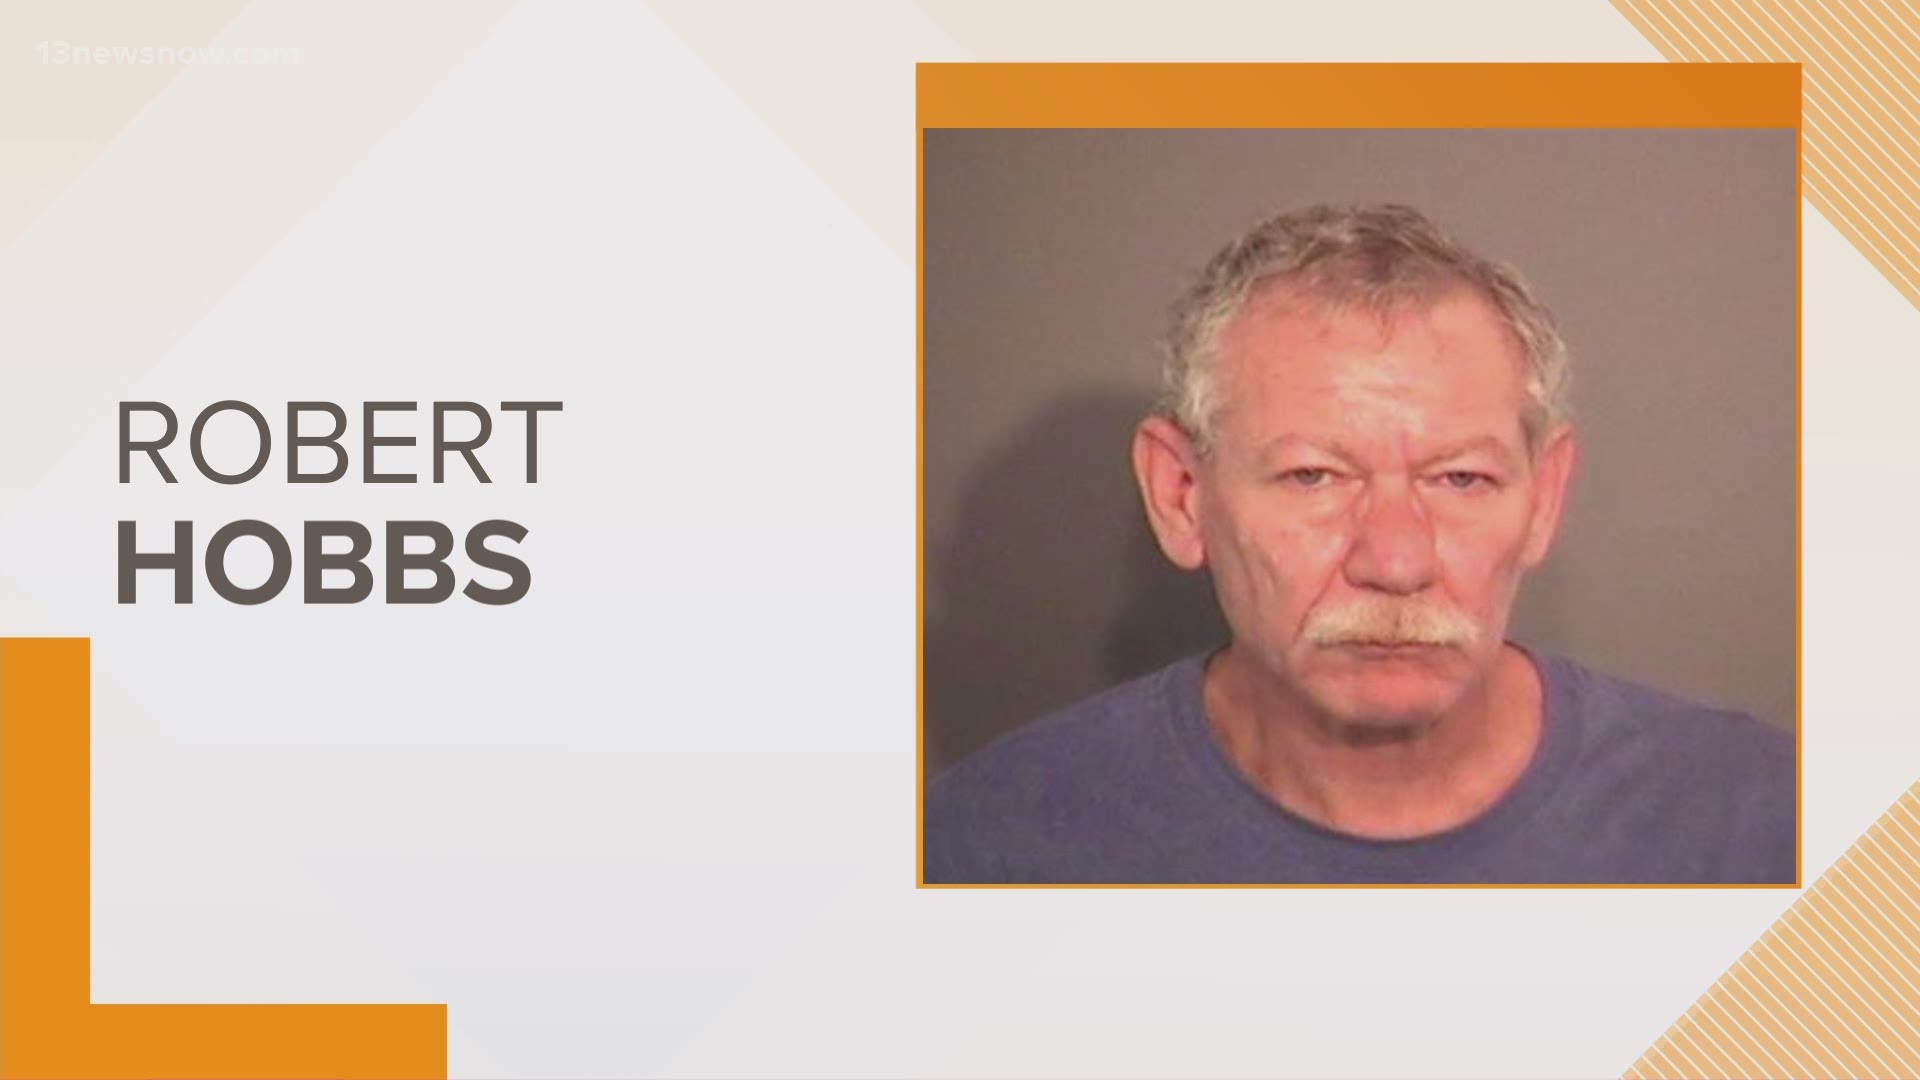 Franklin Police Department said information from an uninvolved incident resulted in the arrest of Robert Leroy Hobbs, 59.